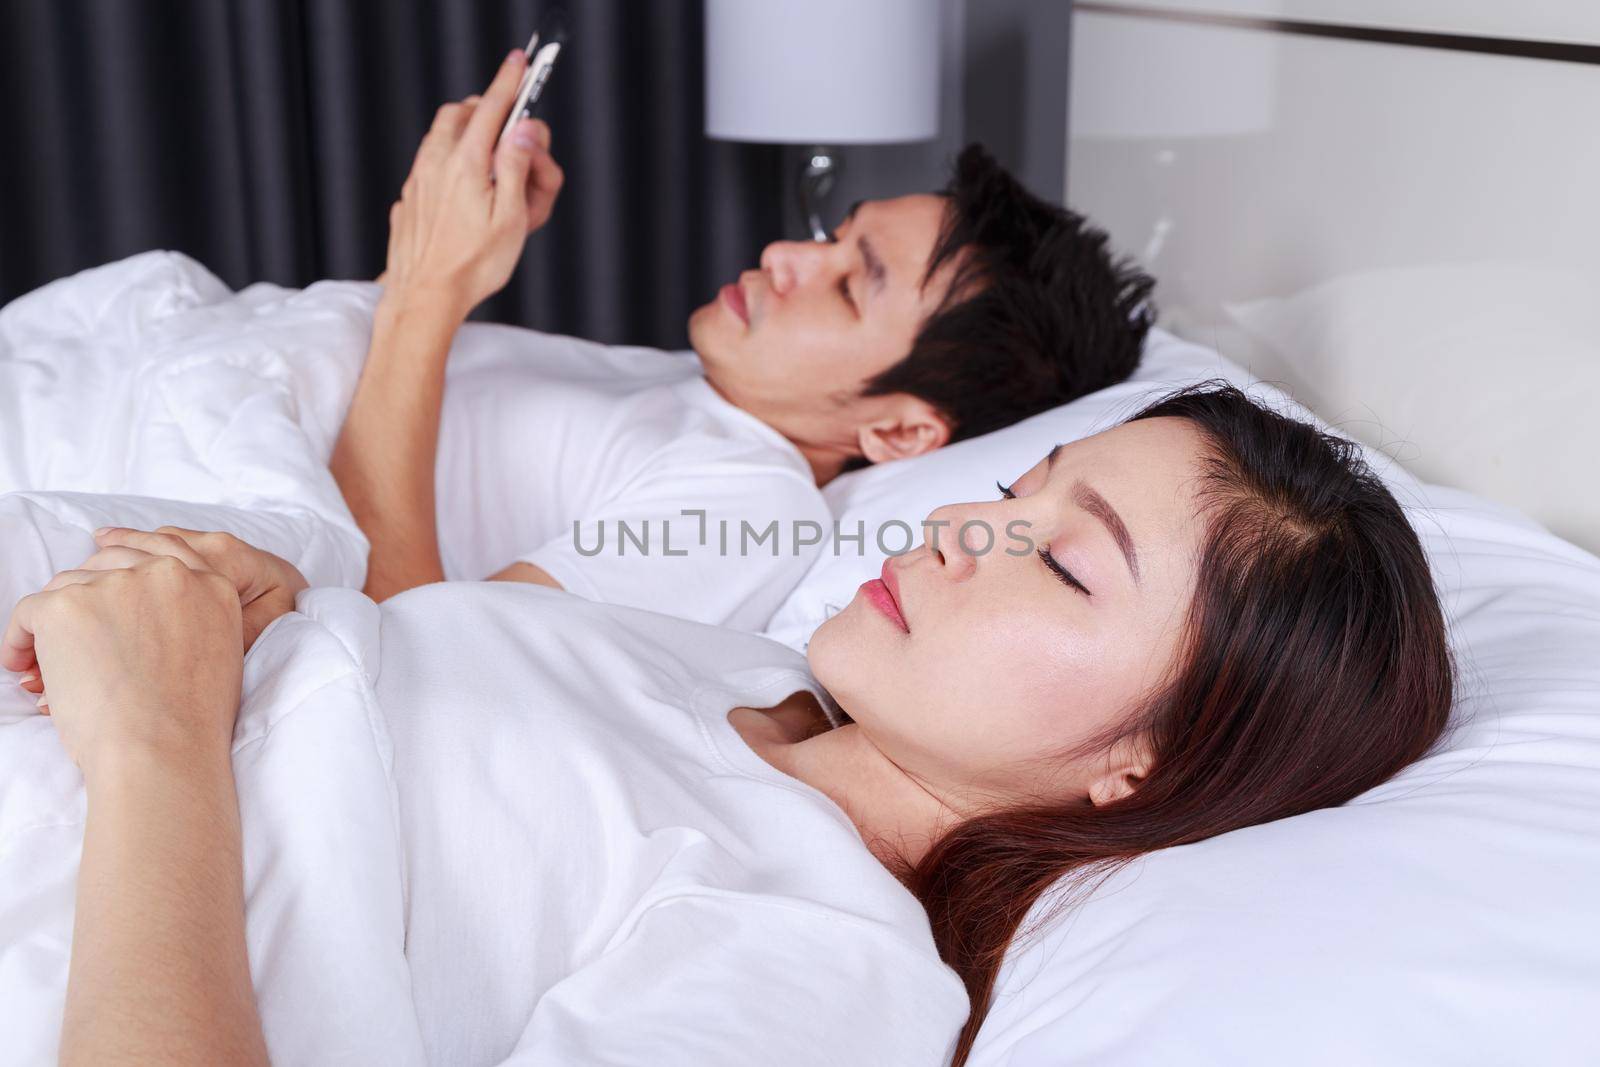 woman in bed with her sleeping and her husband texting on smartphone in the bedroom